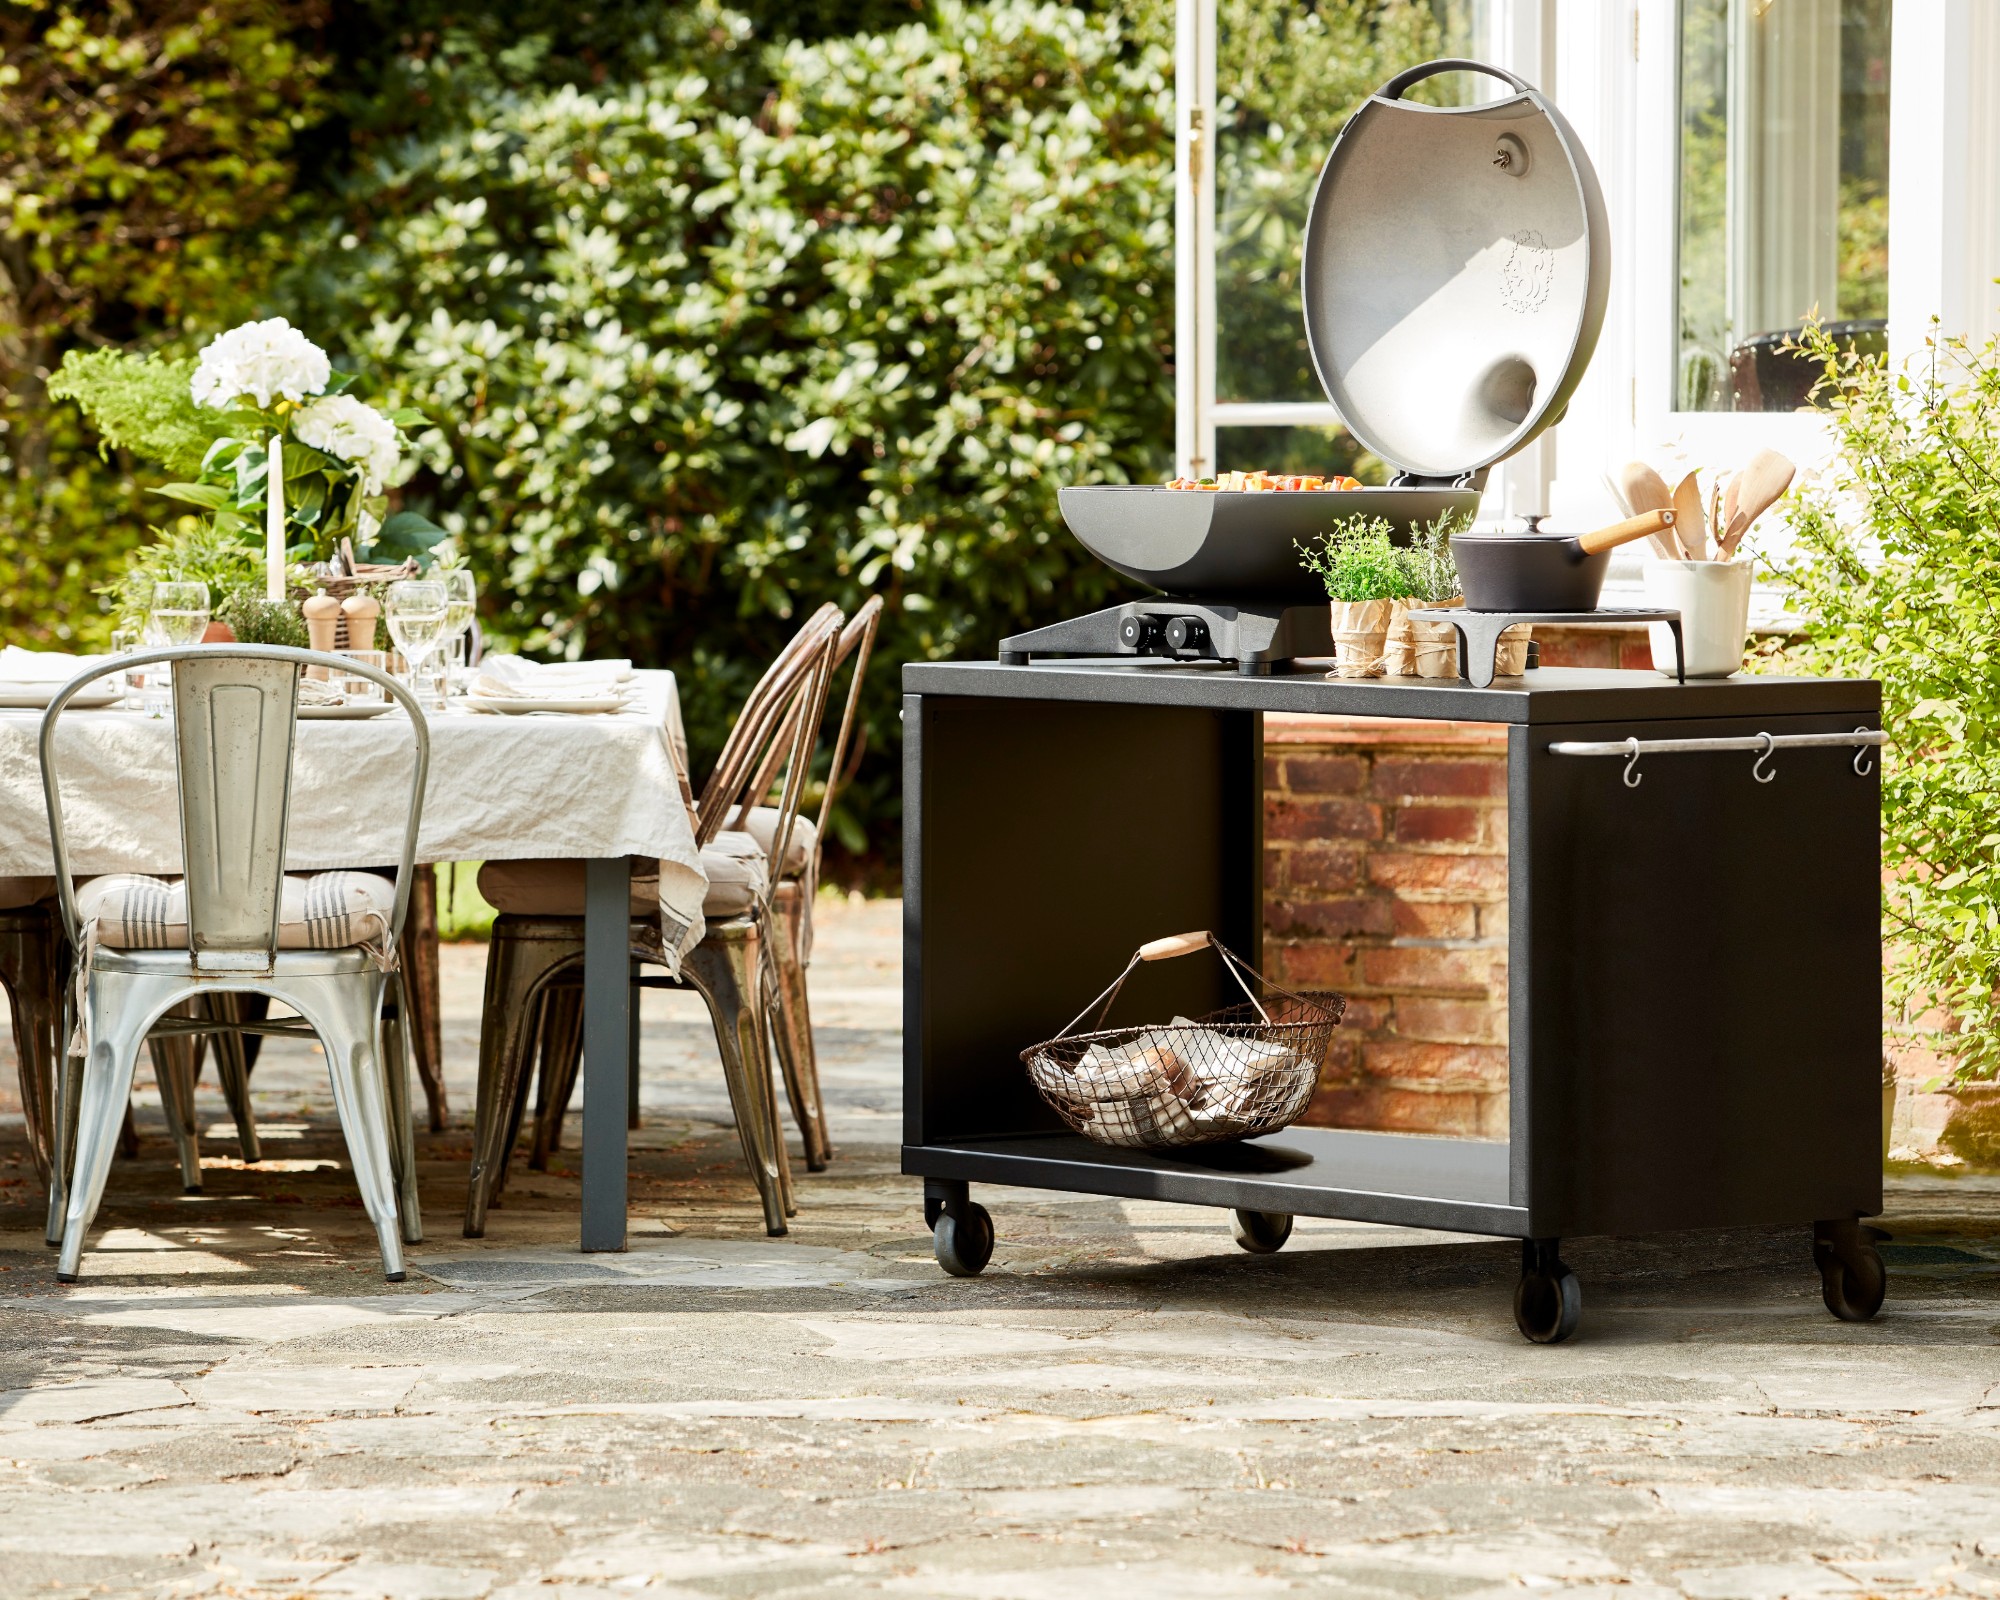 20 outdoor kitchen ideas – enviable and inspiring designs for your ...